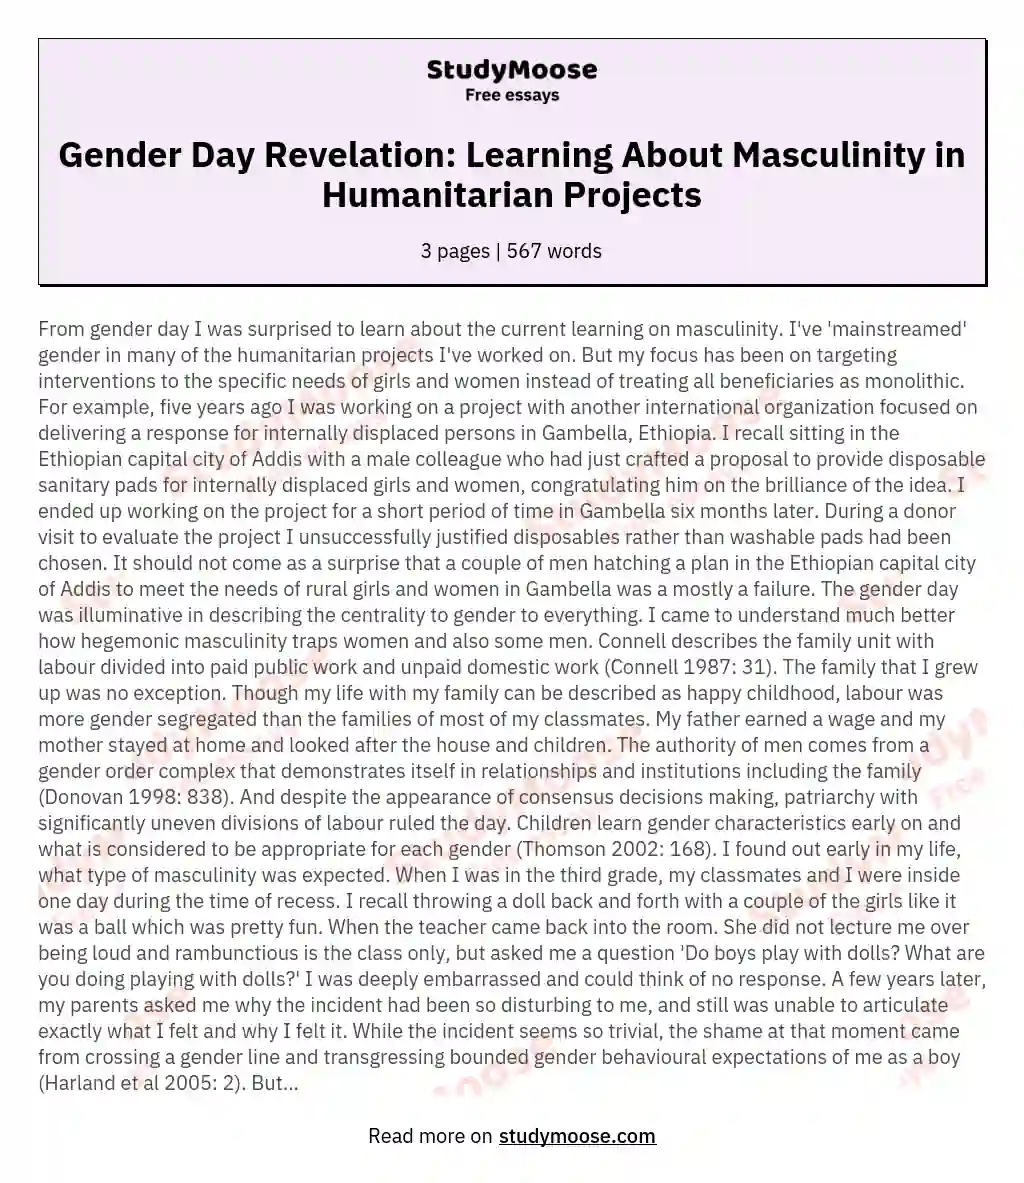 Gender Day Revelation: Learning About Masculinity in Humanitarian Projects essay